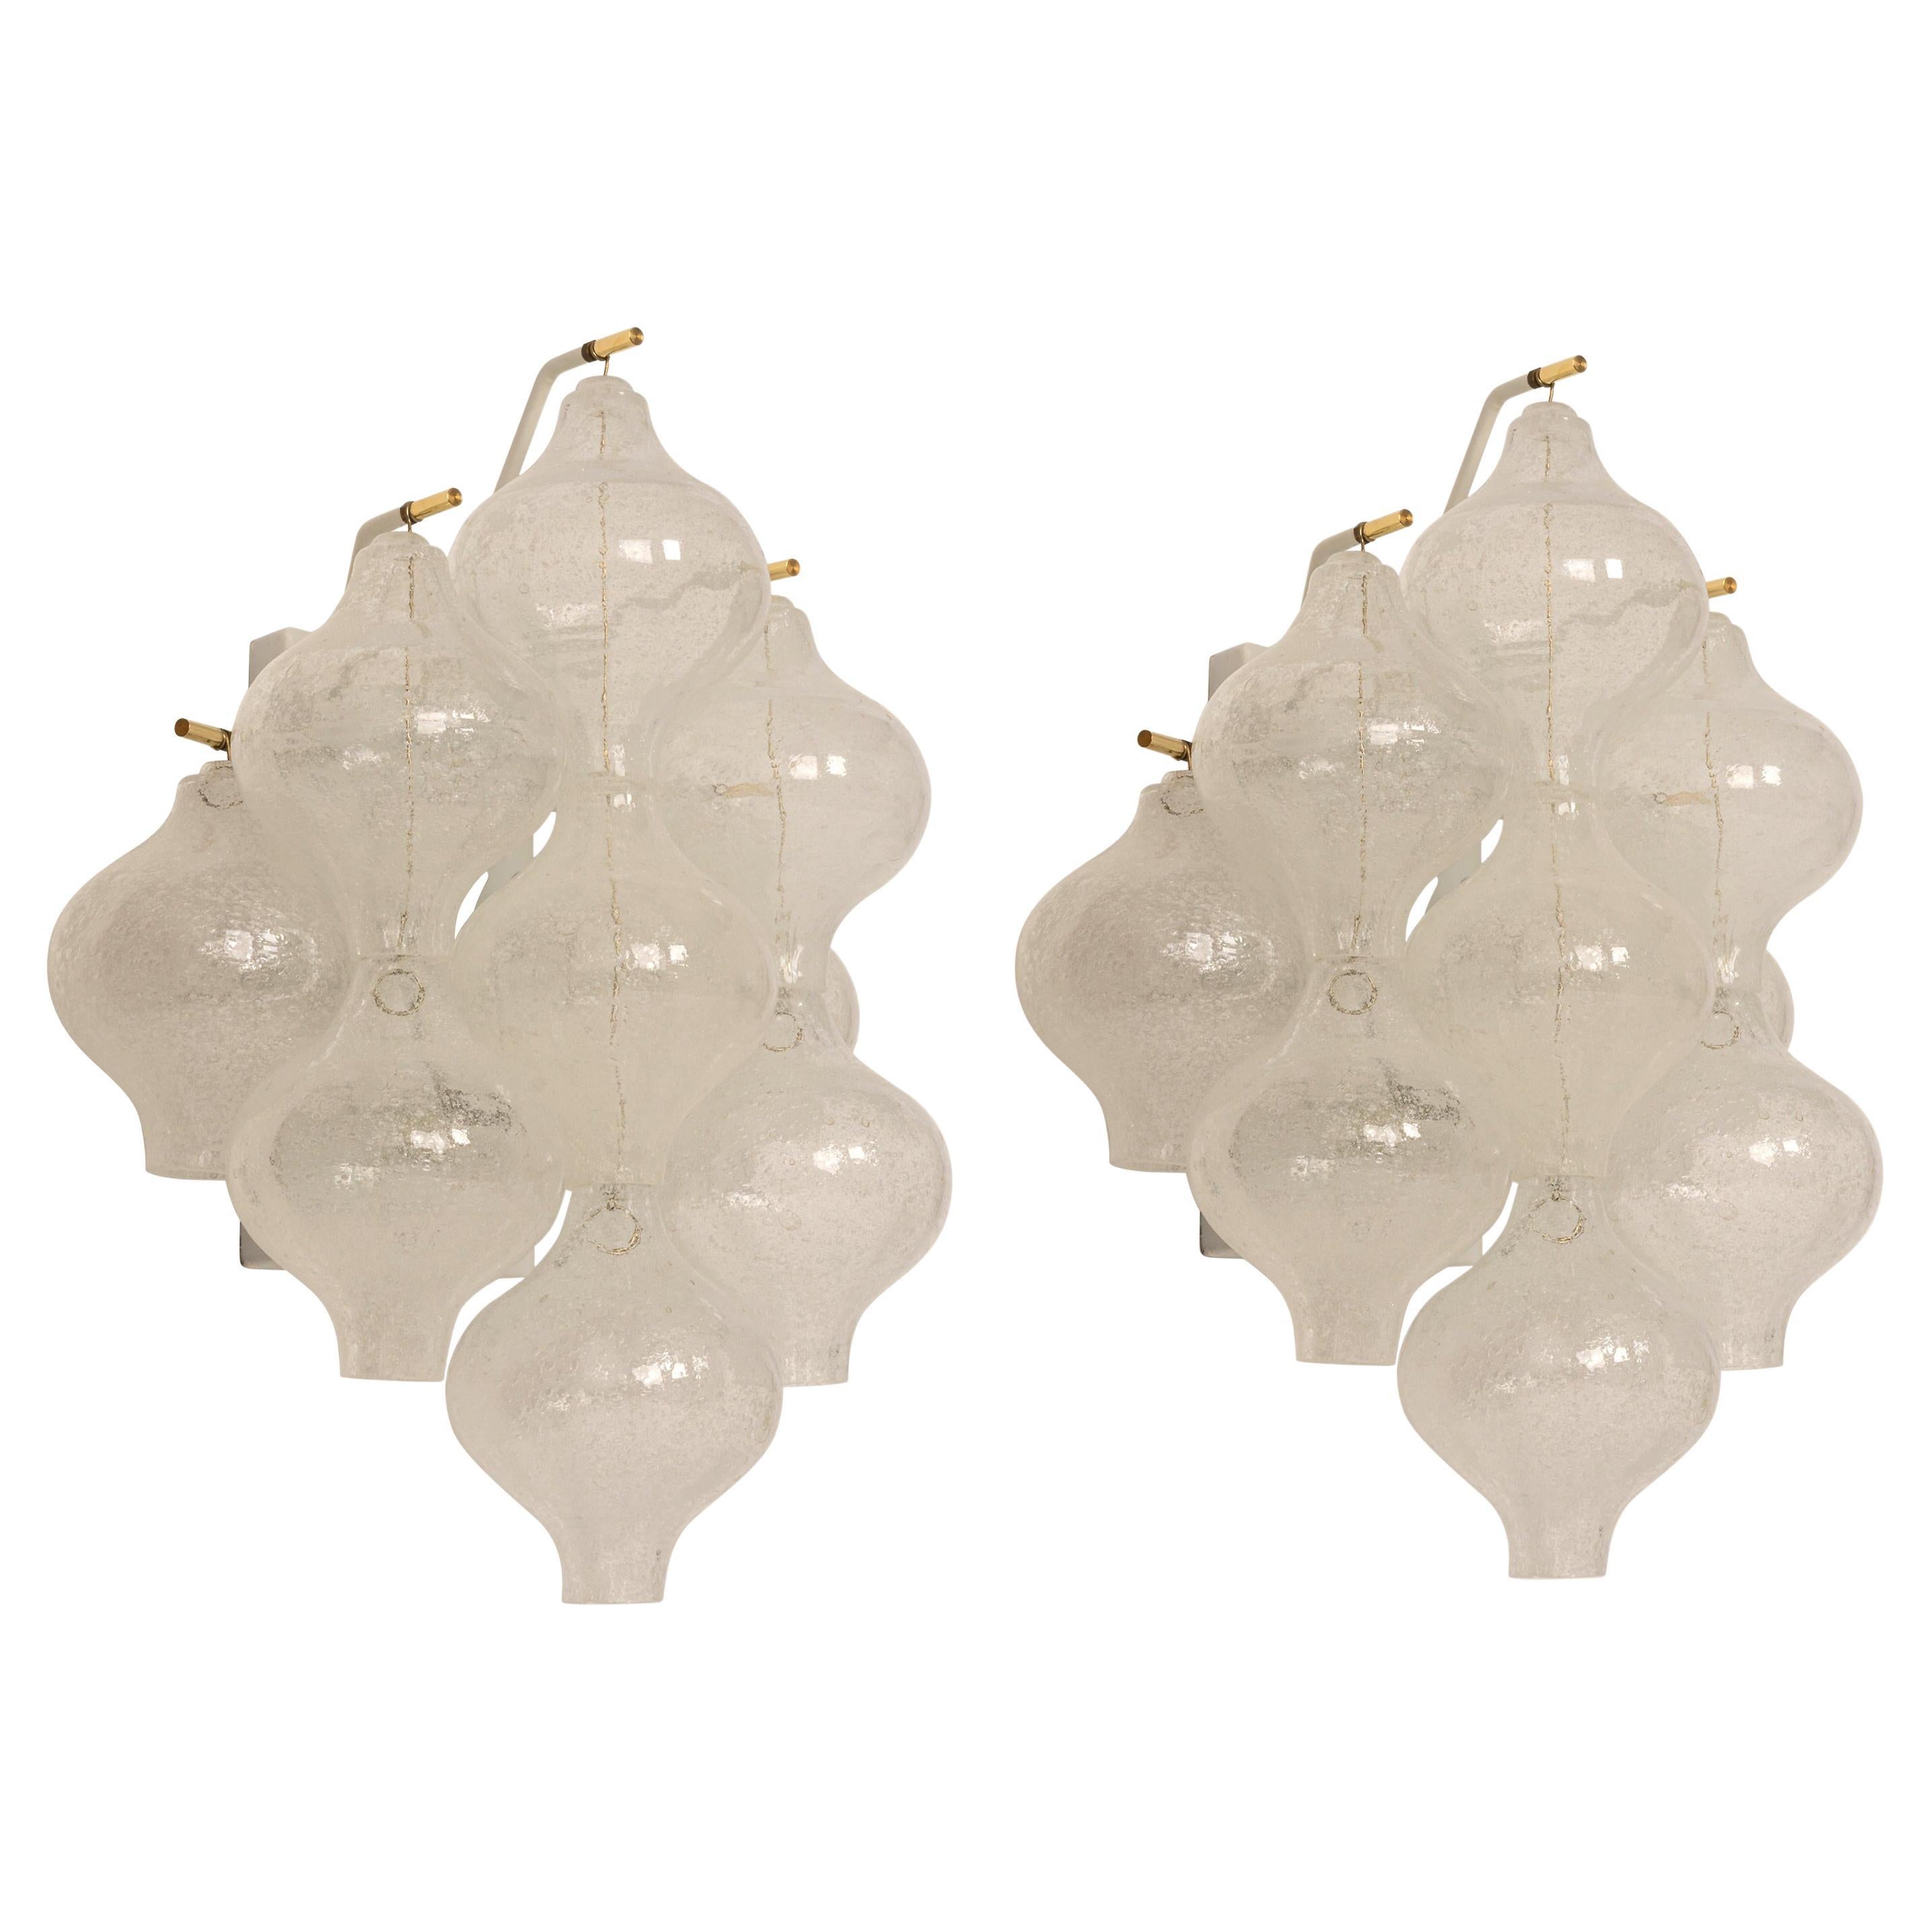 Wonderful pair of midcentury wall sconces, made by Kalmar, Austria, manufactured, circa 1970-1979.
Each tulip-shaped glass is handmade which makes each glass piece a unique piece. Each sconce is made of 7 glass pieces on a white enameled metal